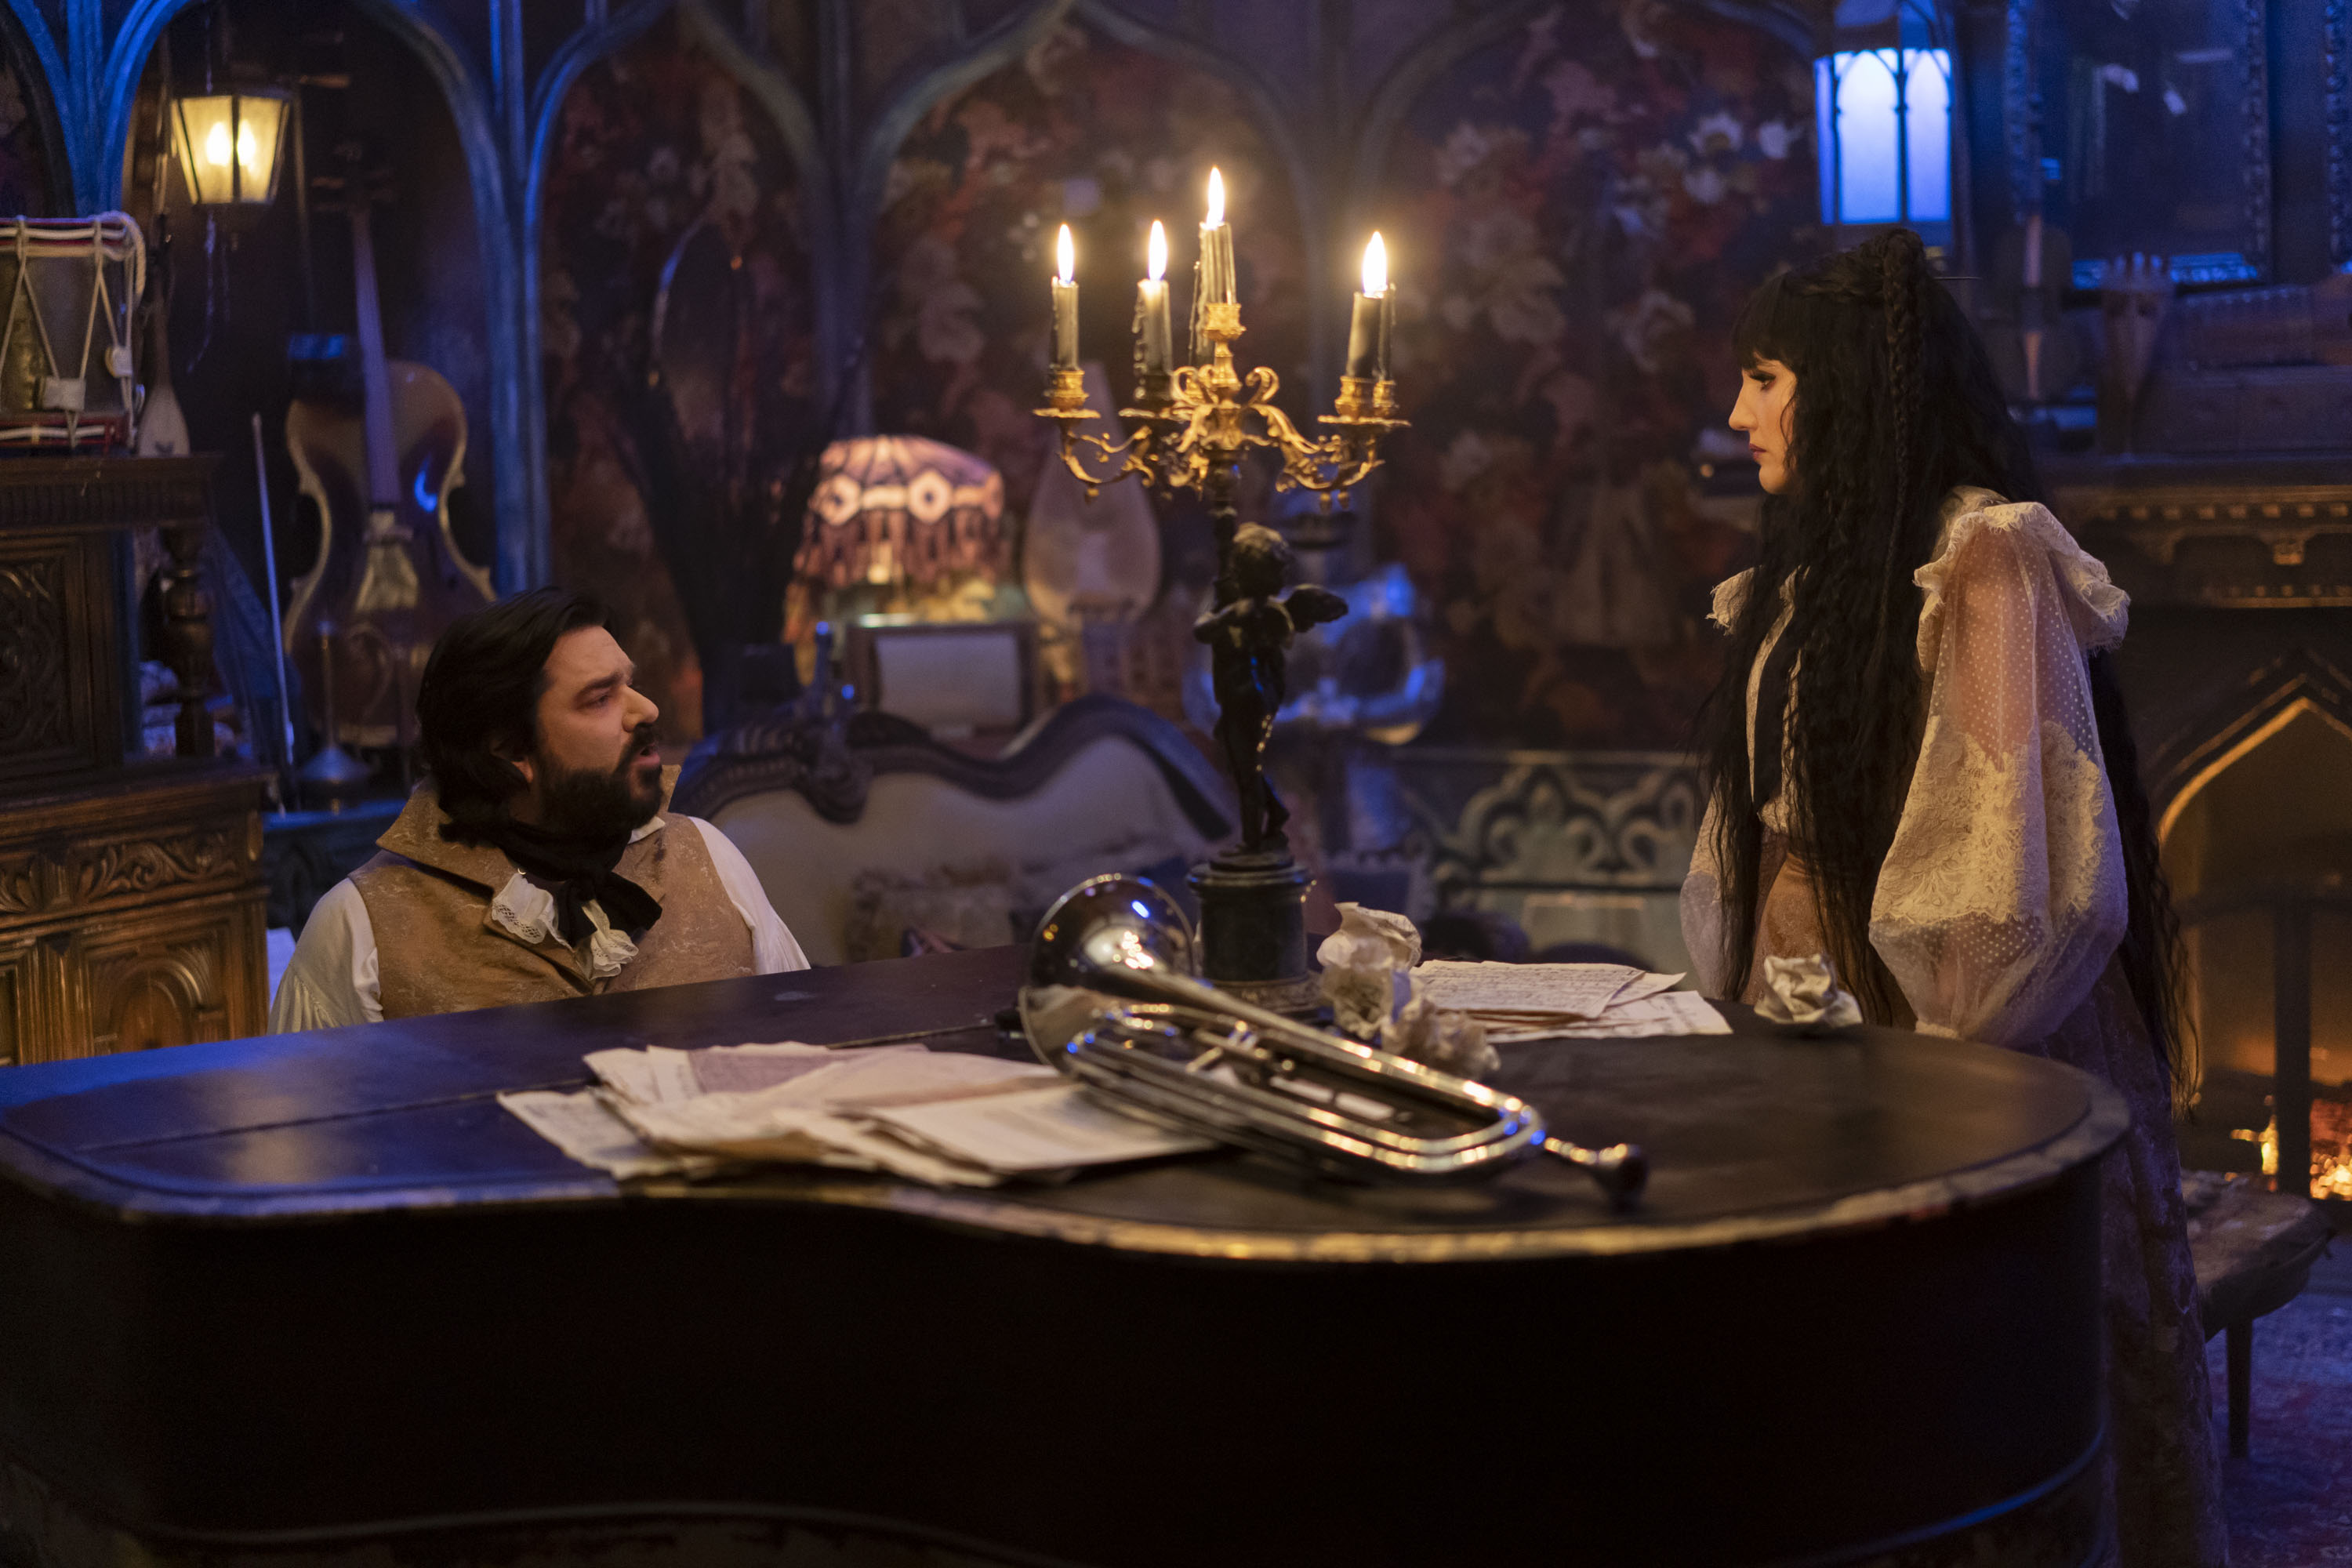 What We Do In The Shadows has been nominated for several Emmys